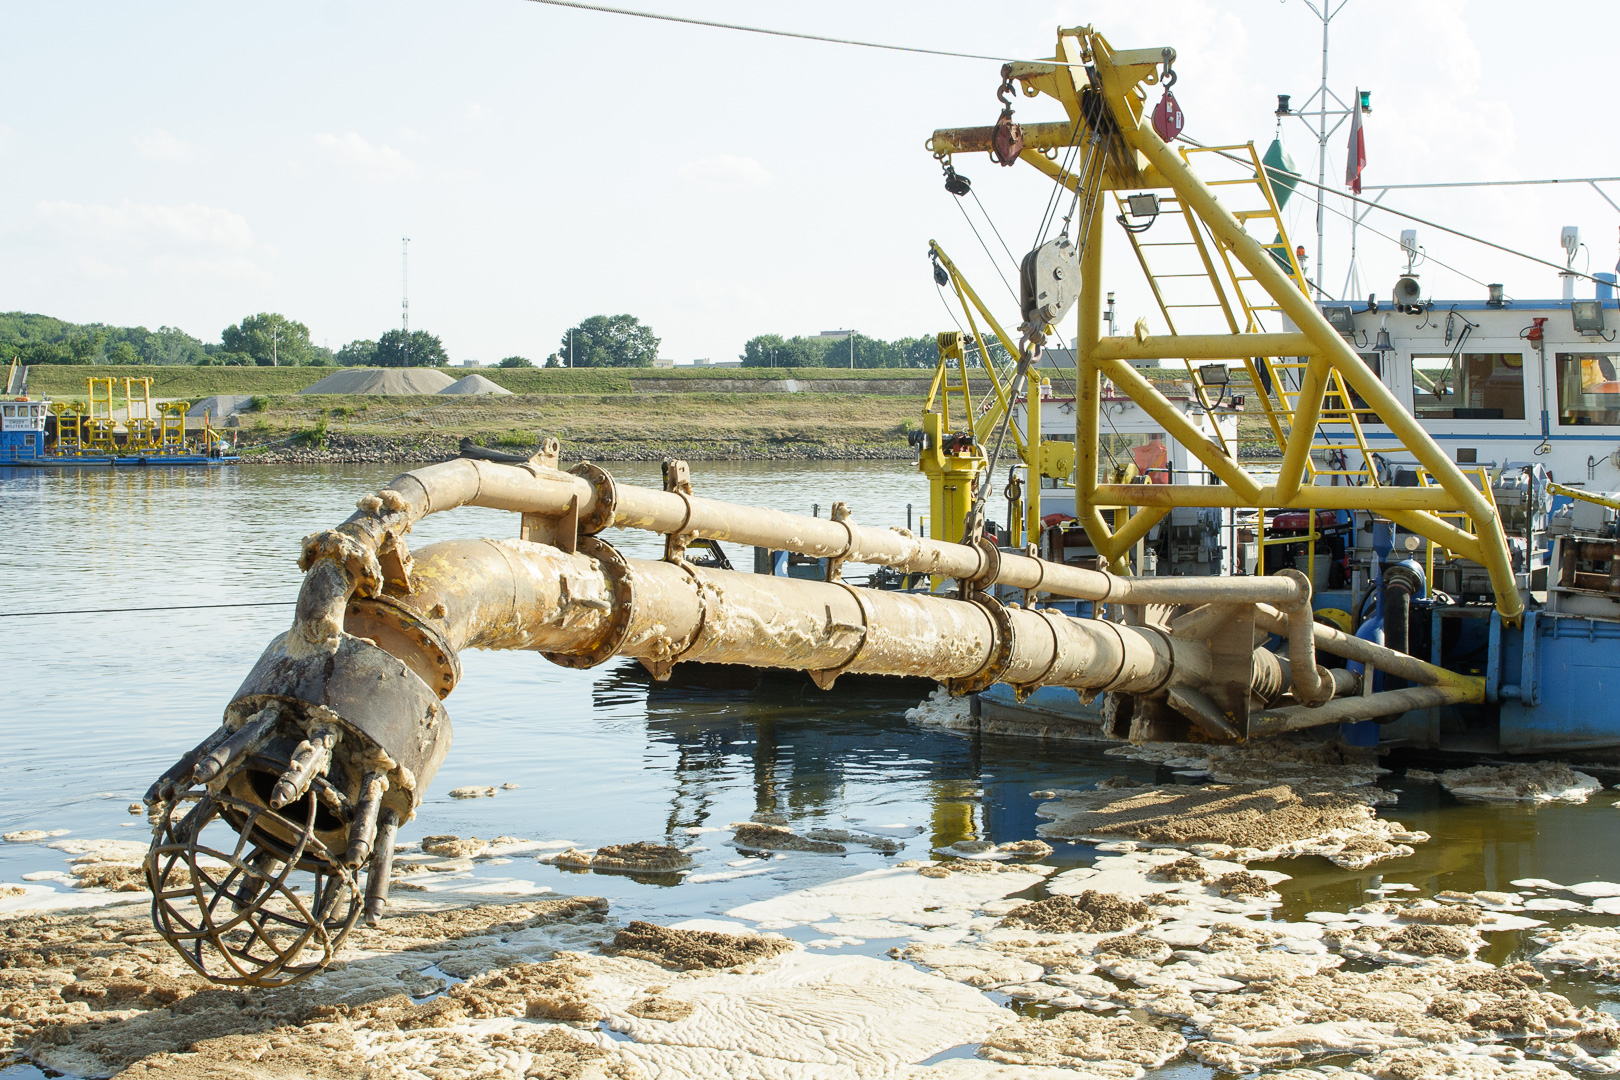 dredge mining pros and cons